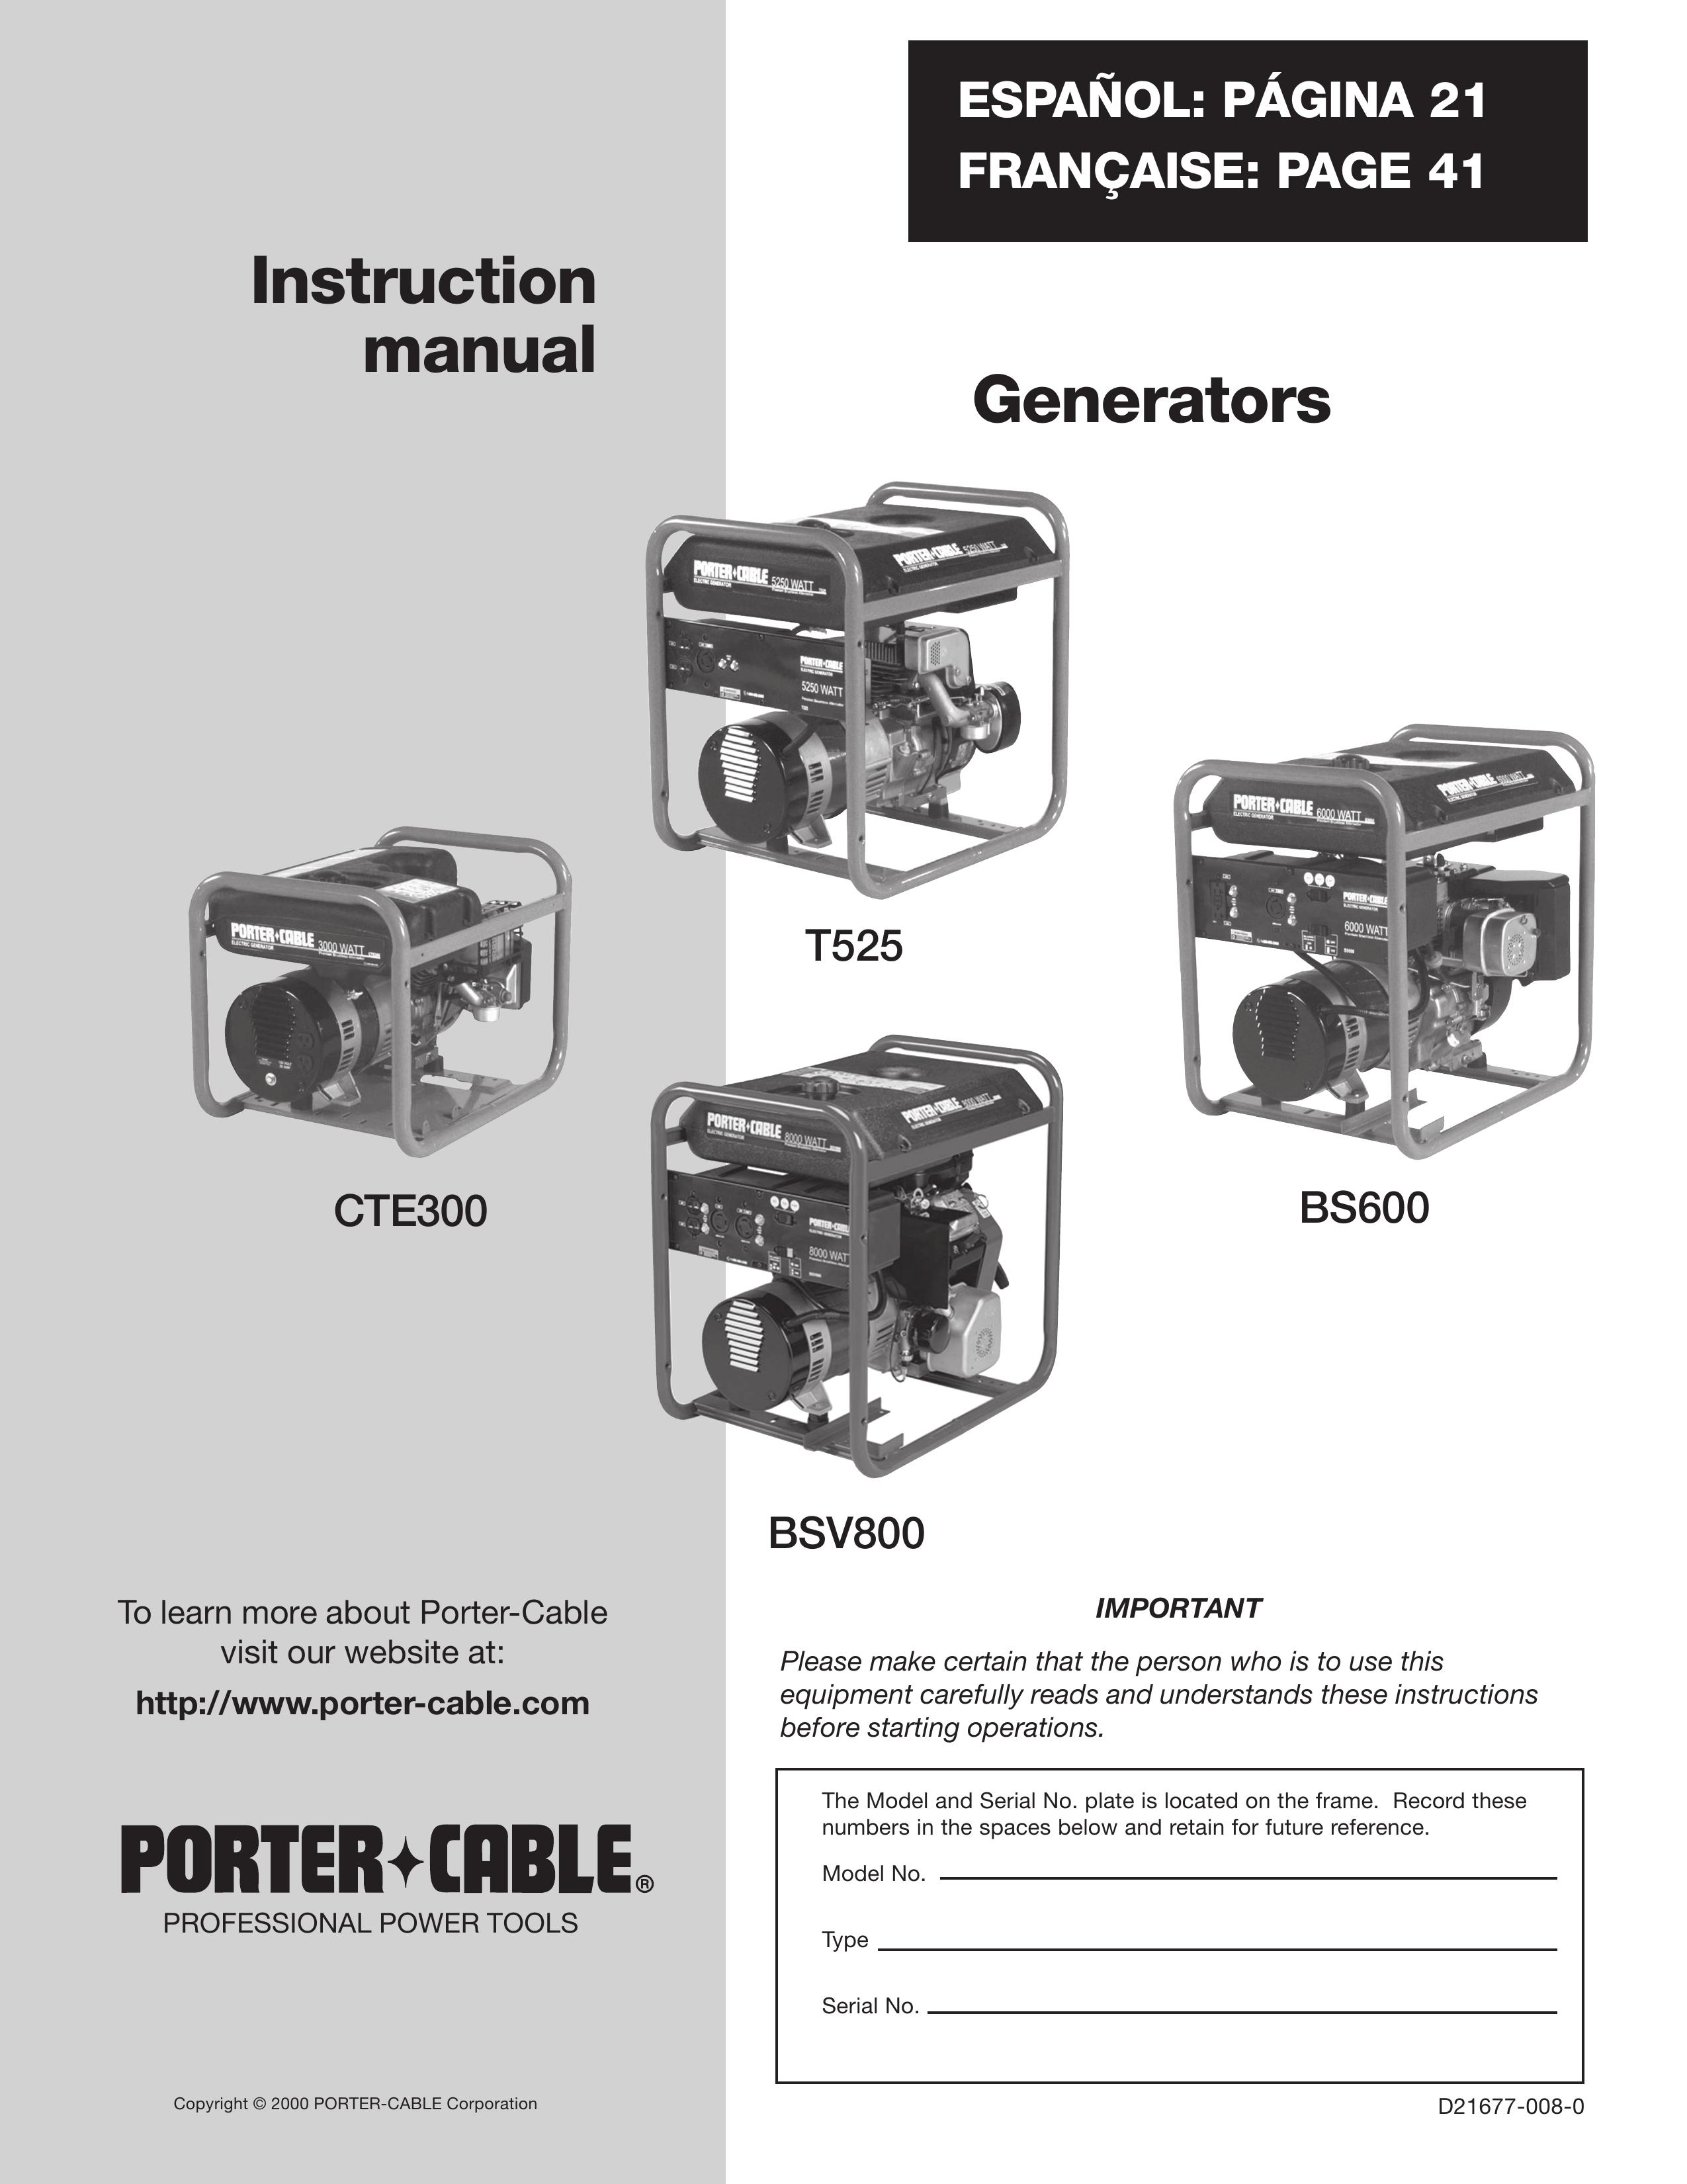 Porter-Cable BS600 Portable Generator User Manual